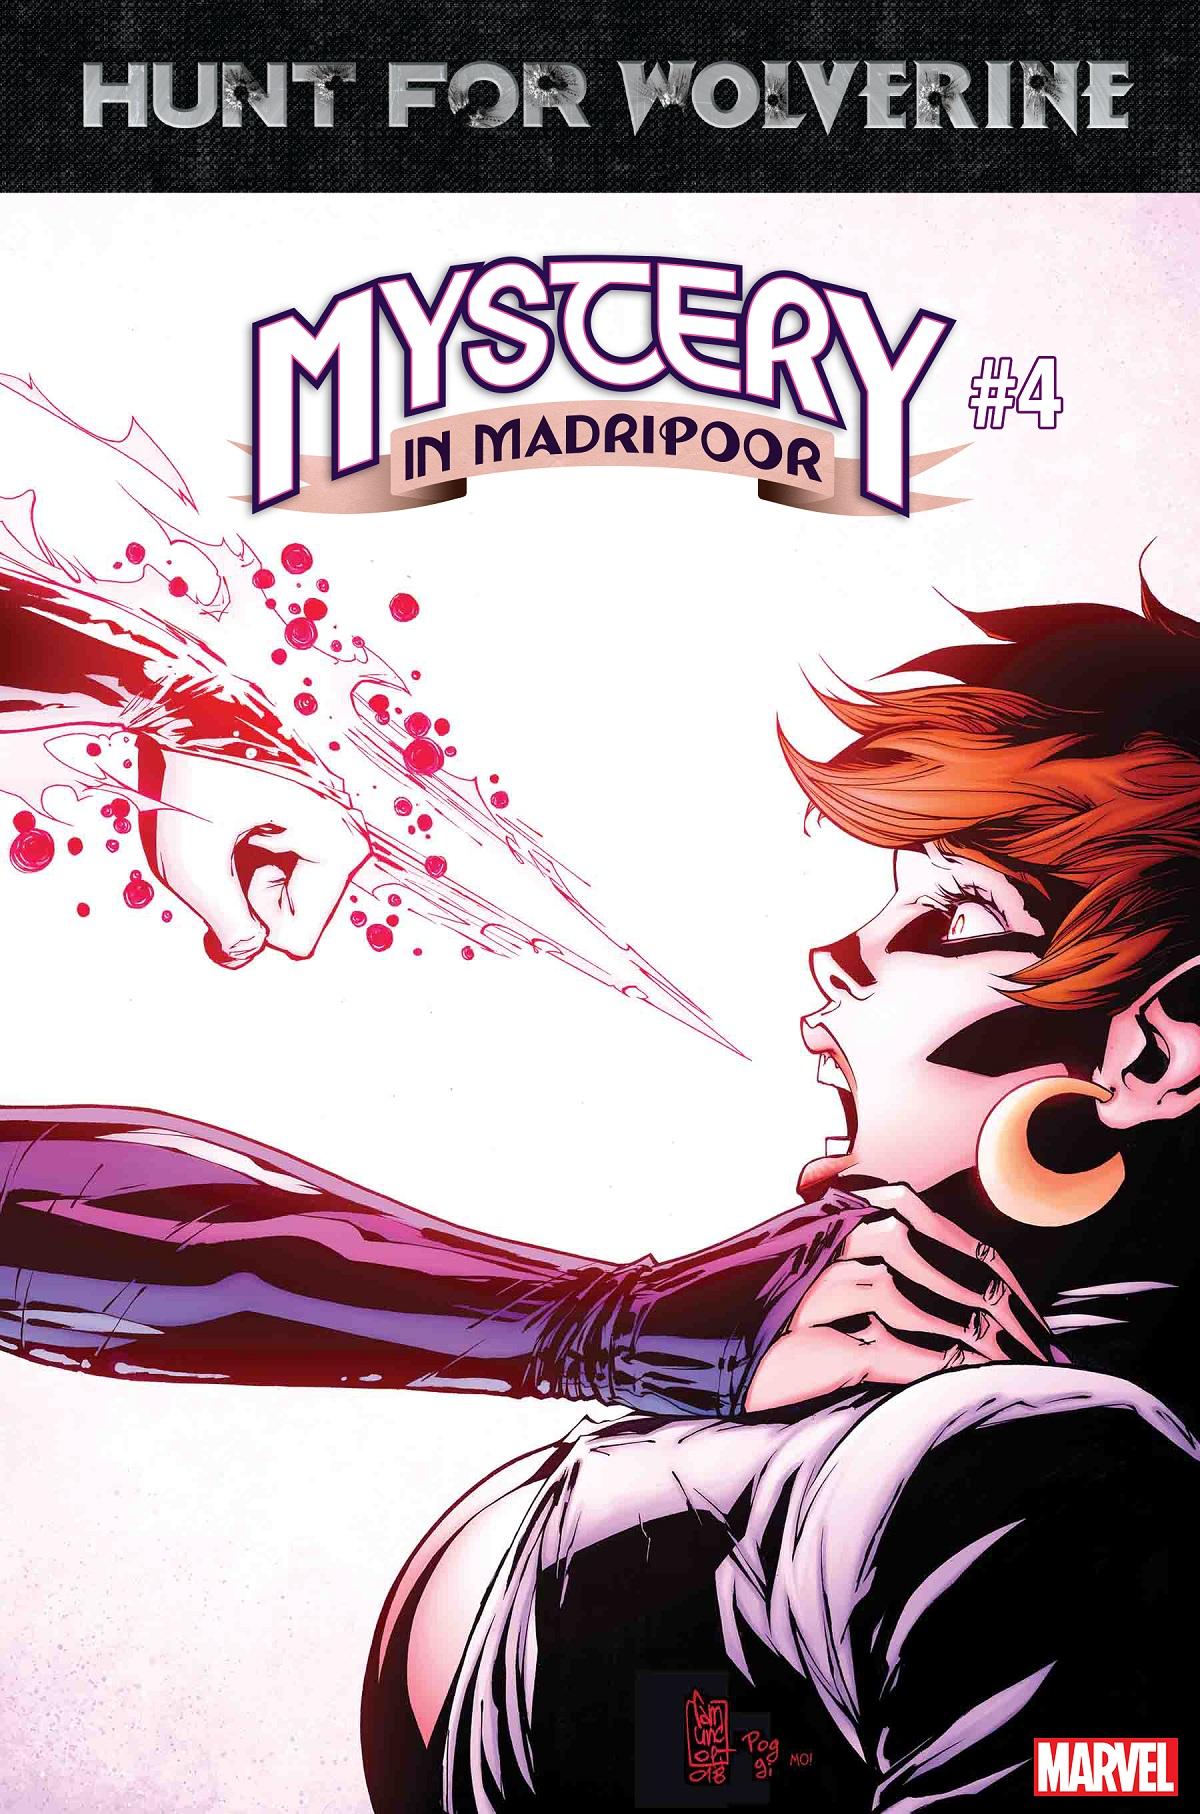 Hunt for Wolverine: Mystery in Madripoor Vol. 1 #4